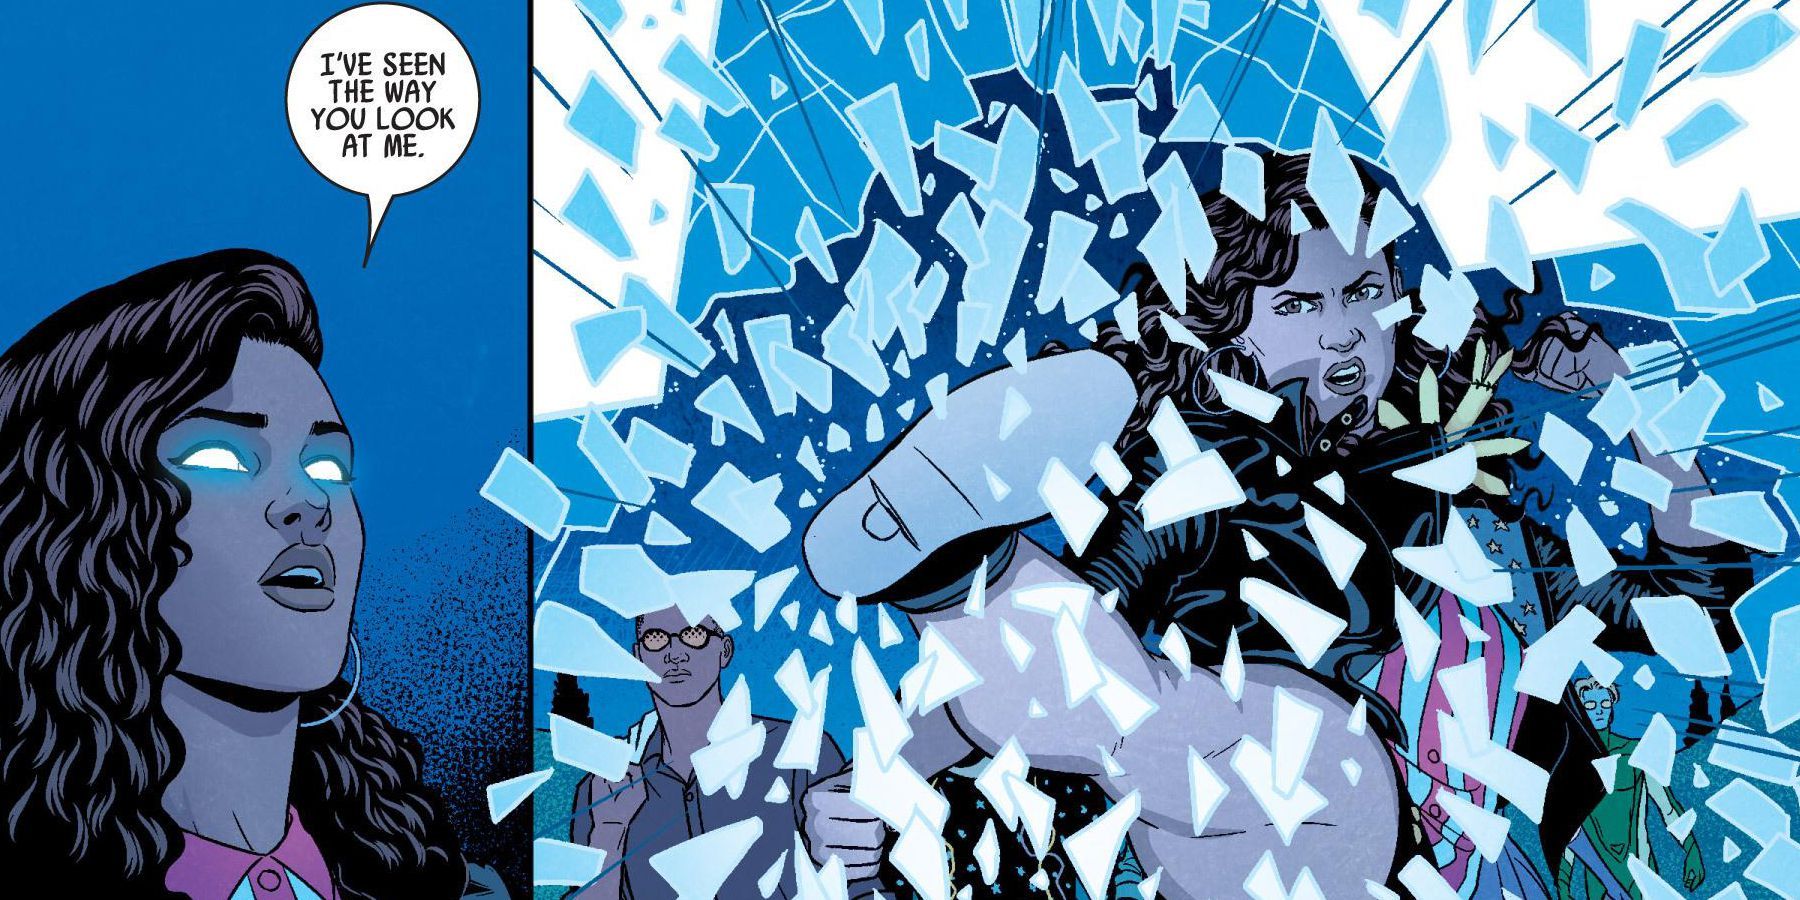 Young Avengers 15 Reasons The Gillen and McKelvie Run Was Great